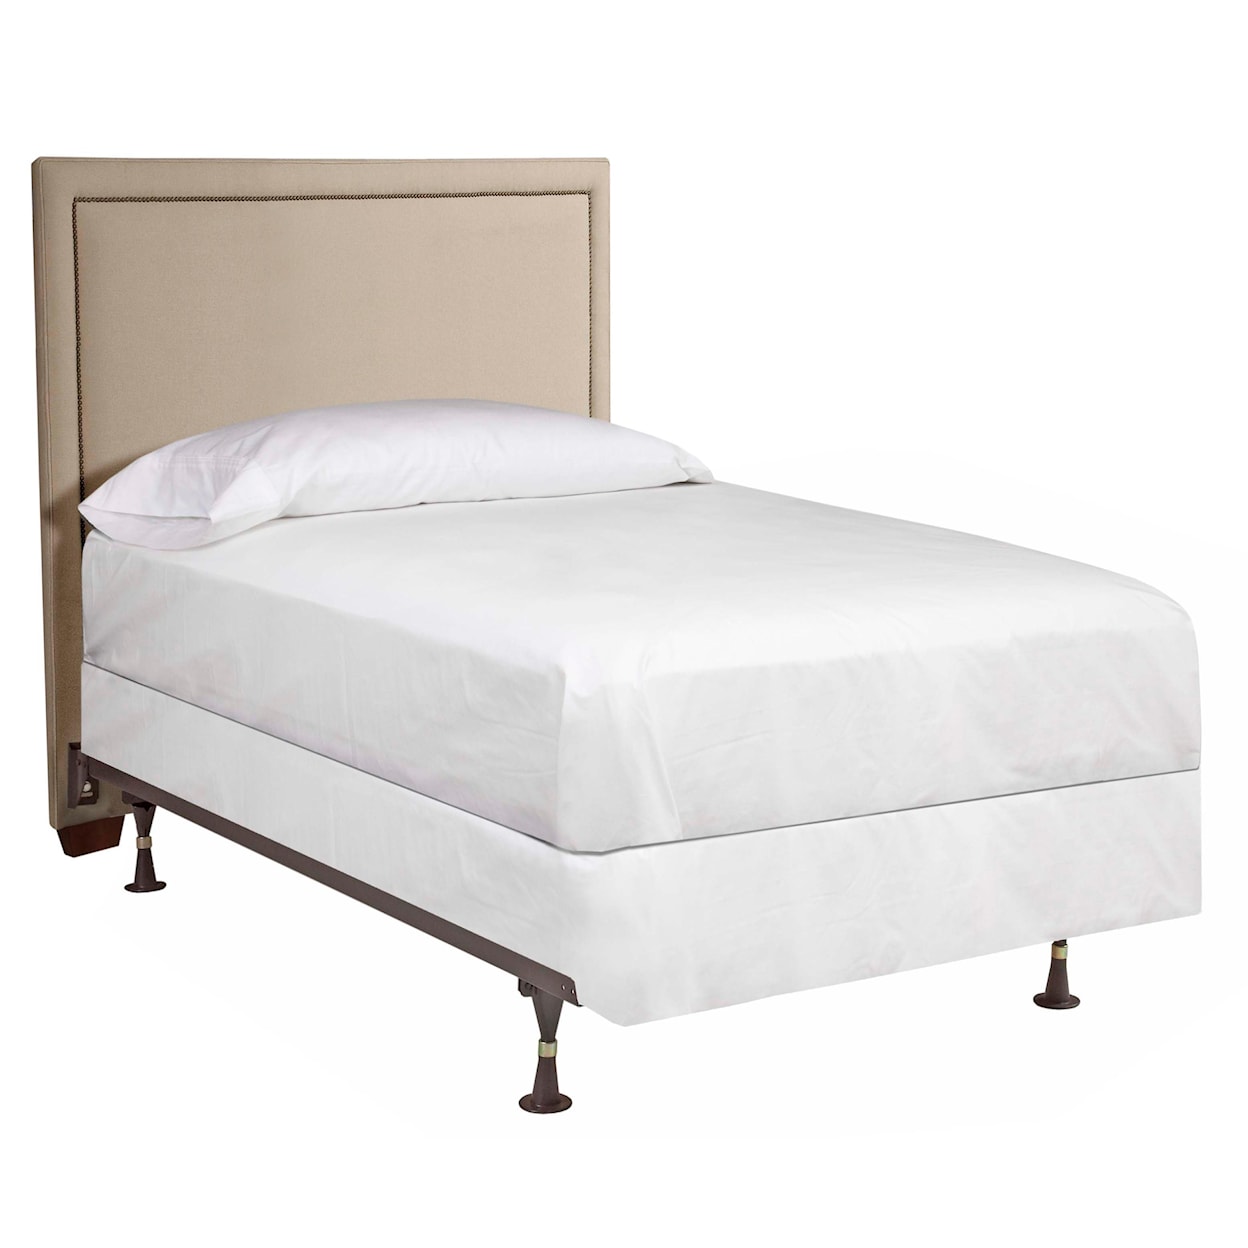 Kincaid Furniture Upholstered Beds Lacey Twin Headboard